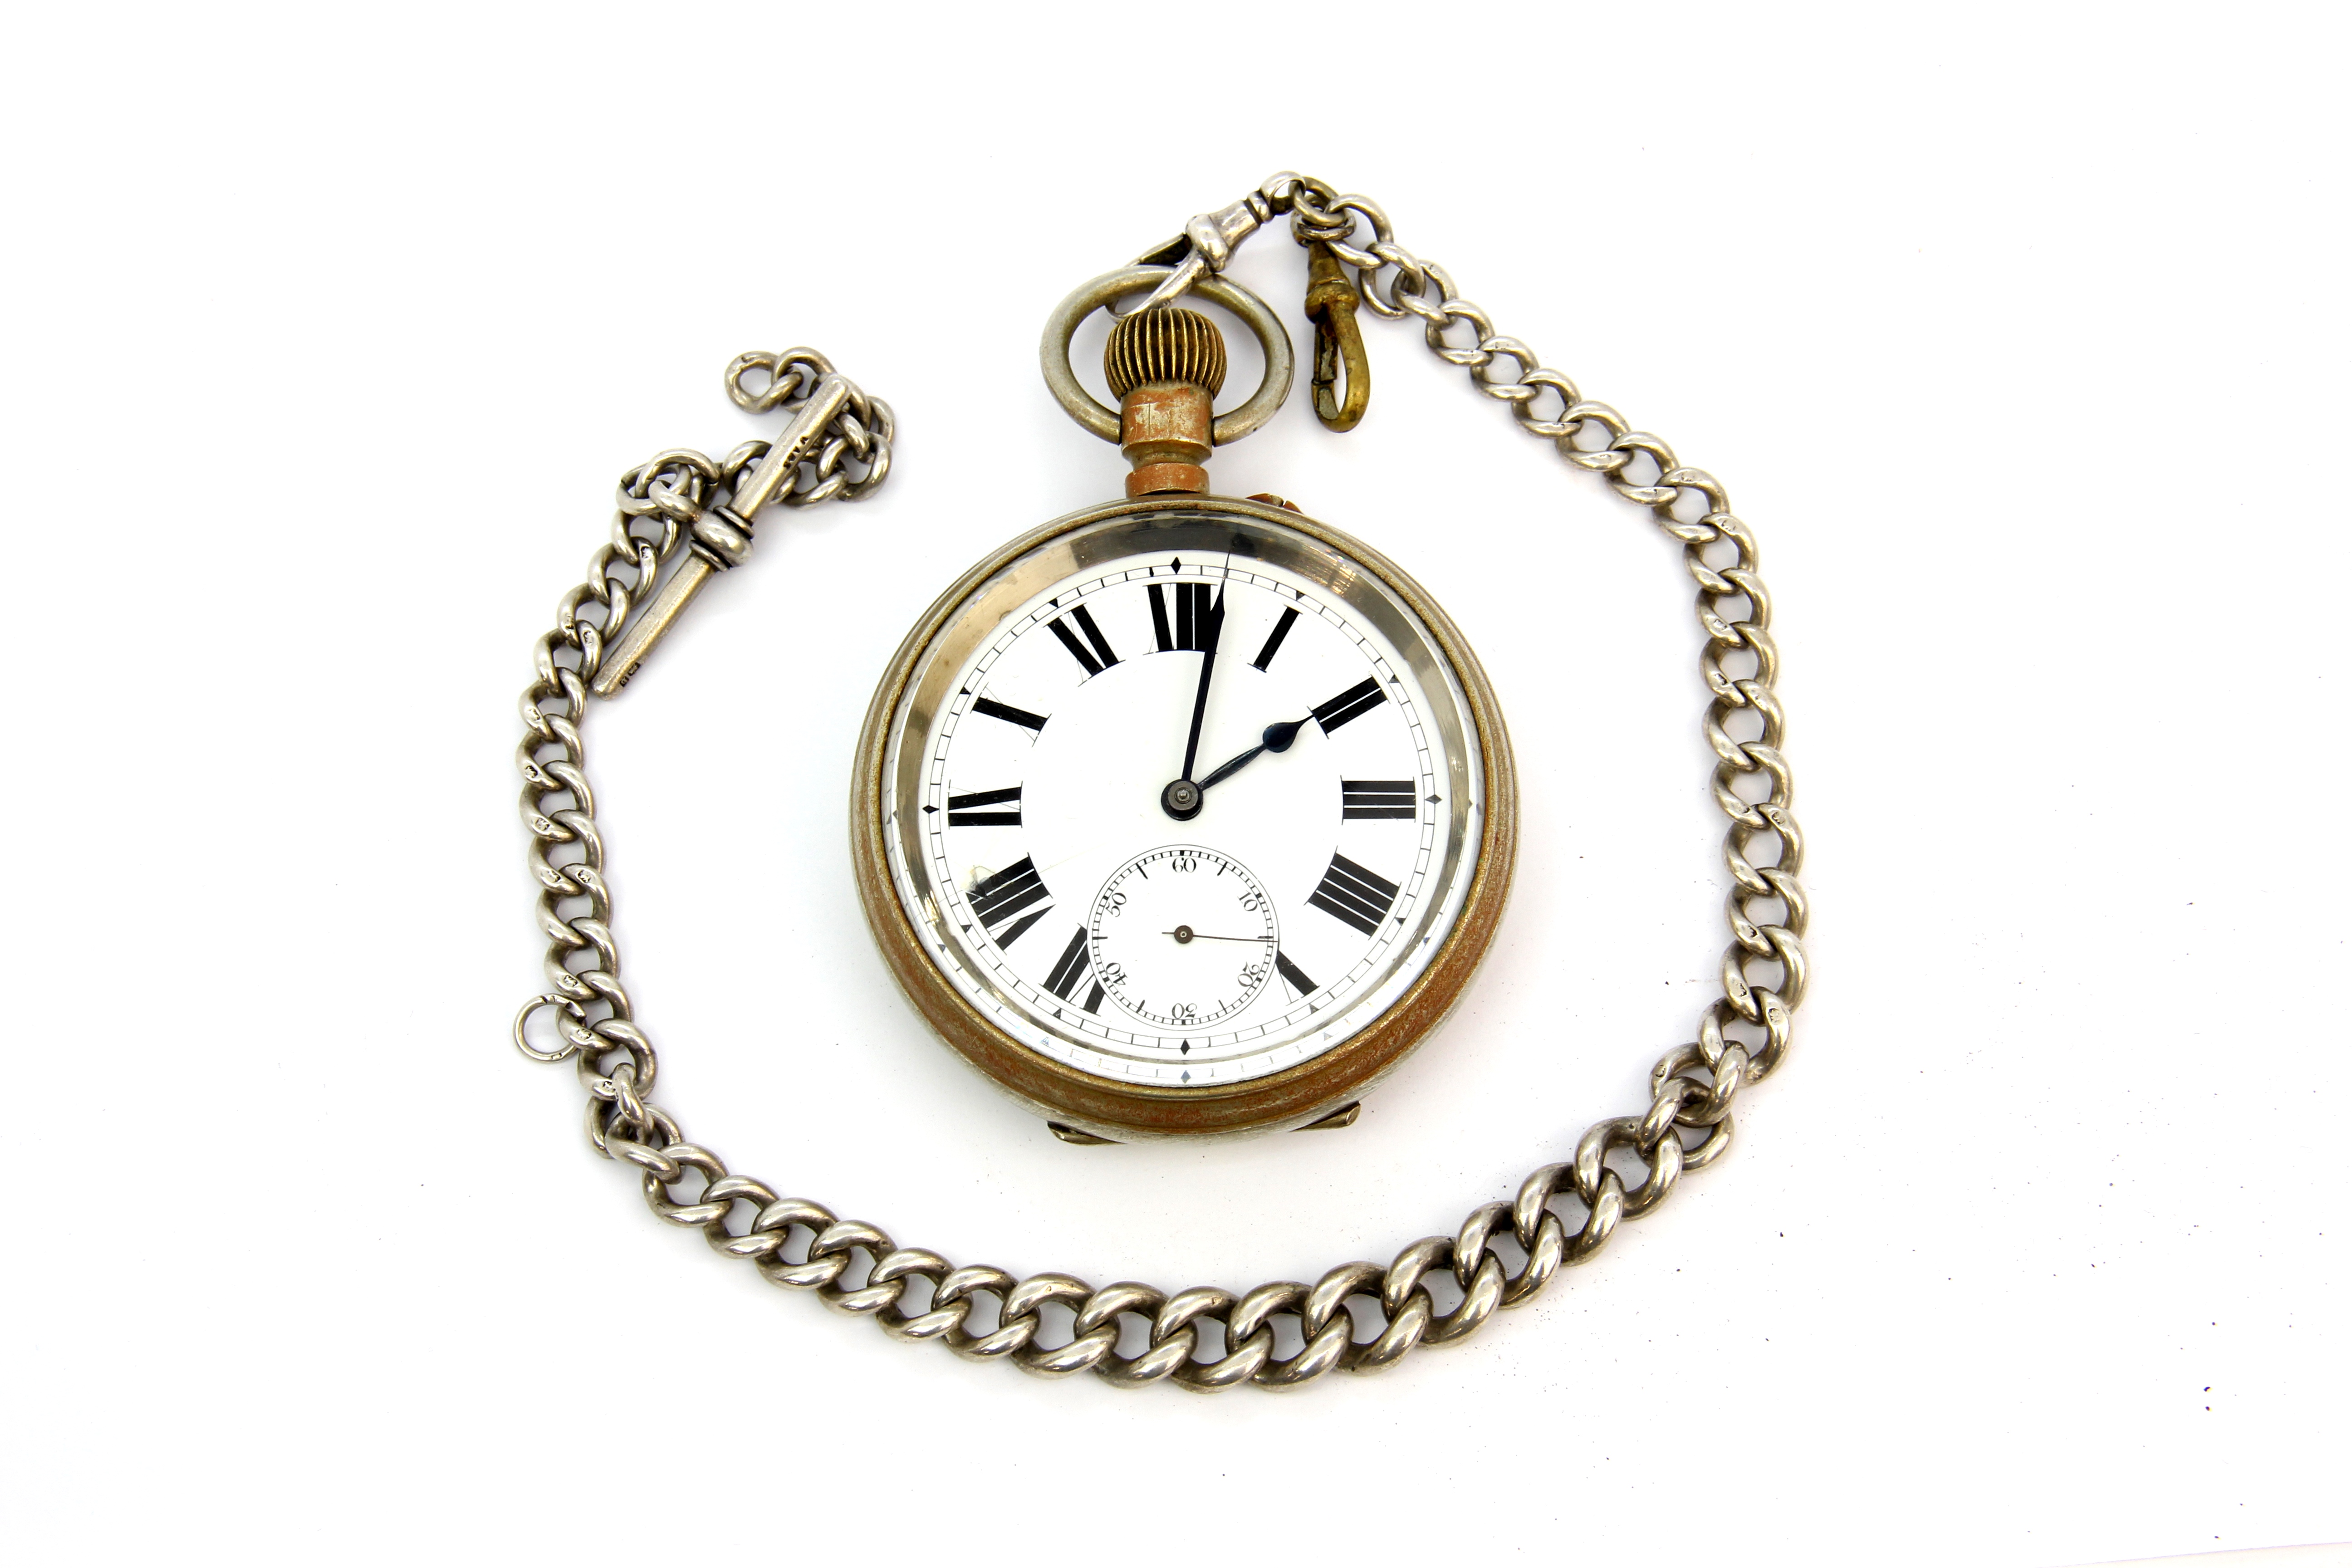 A Goliath pocket watch with a hallmarked silver chain, understood to be in working order. - Image 2 of 3